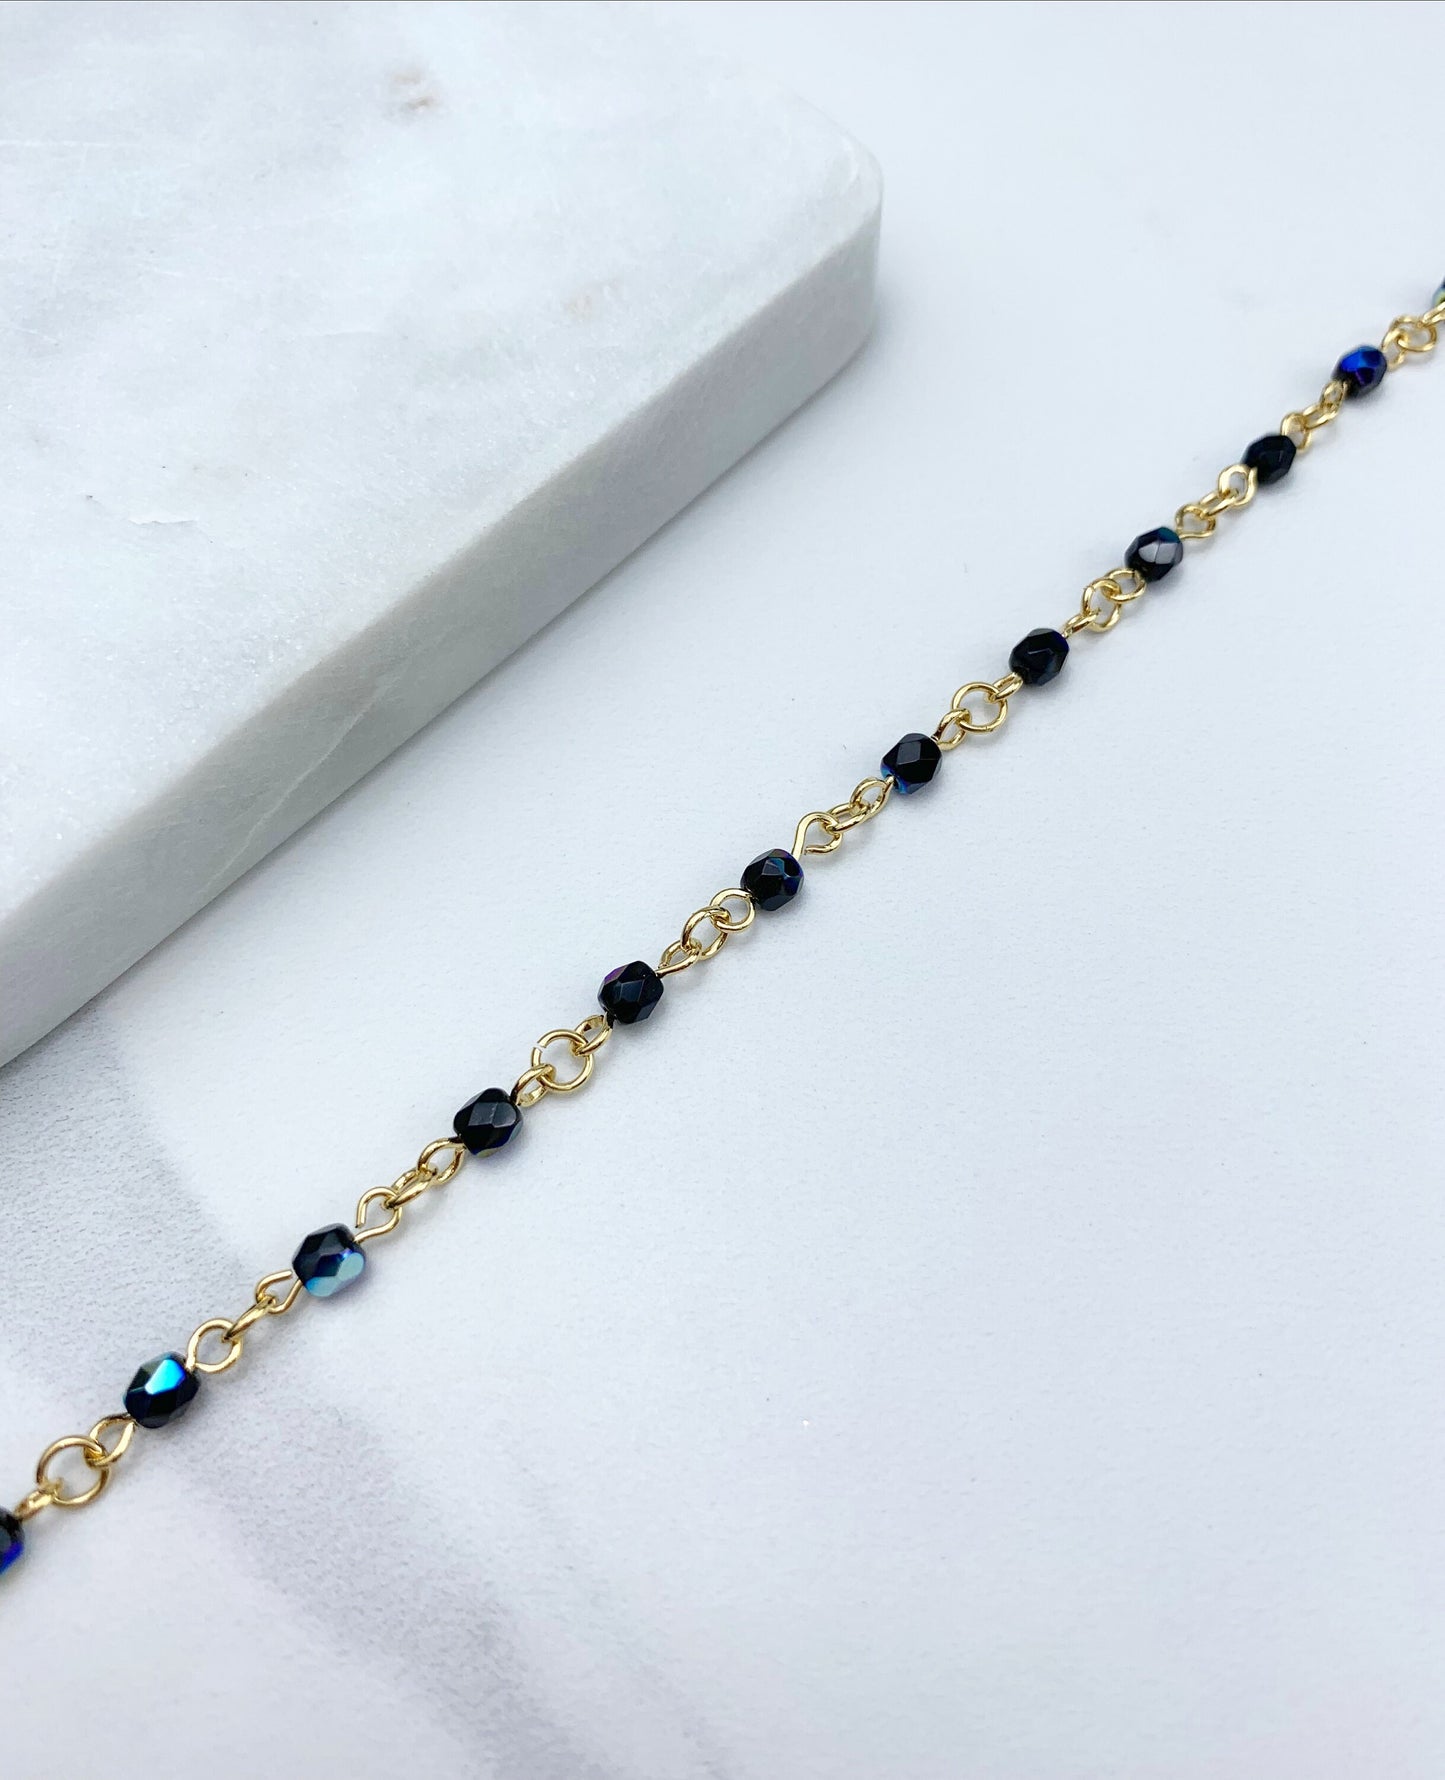 18k Gold Filled Crystal Stone Abacus Beads Chain Anklet Wholesale Jewelry Supplies